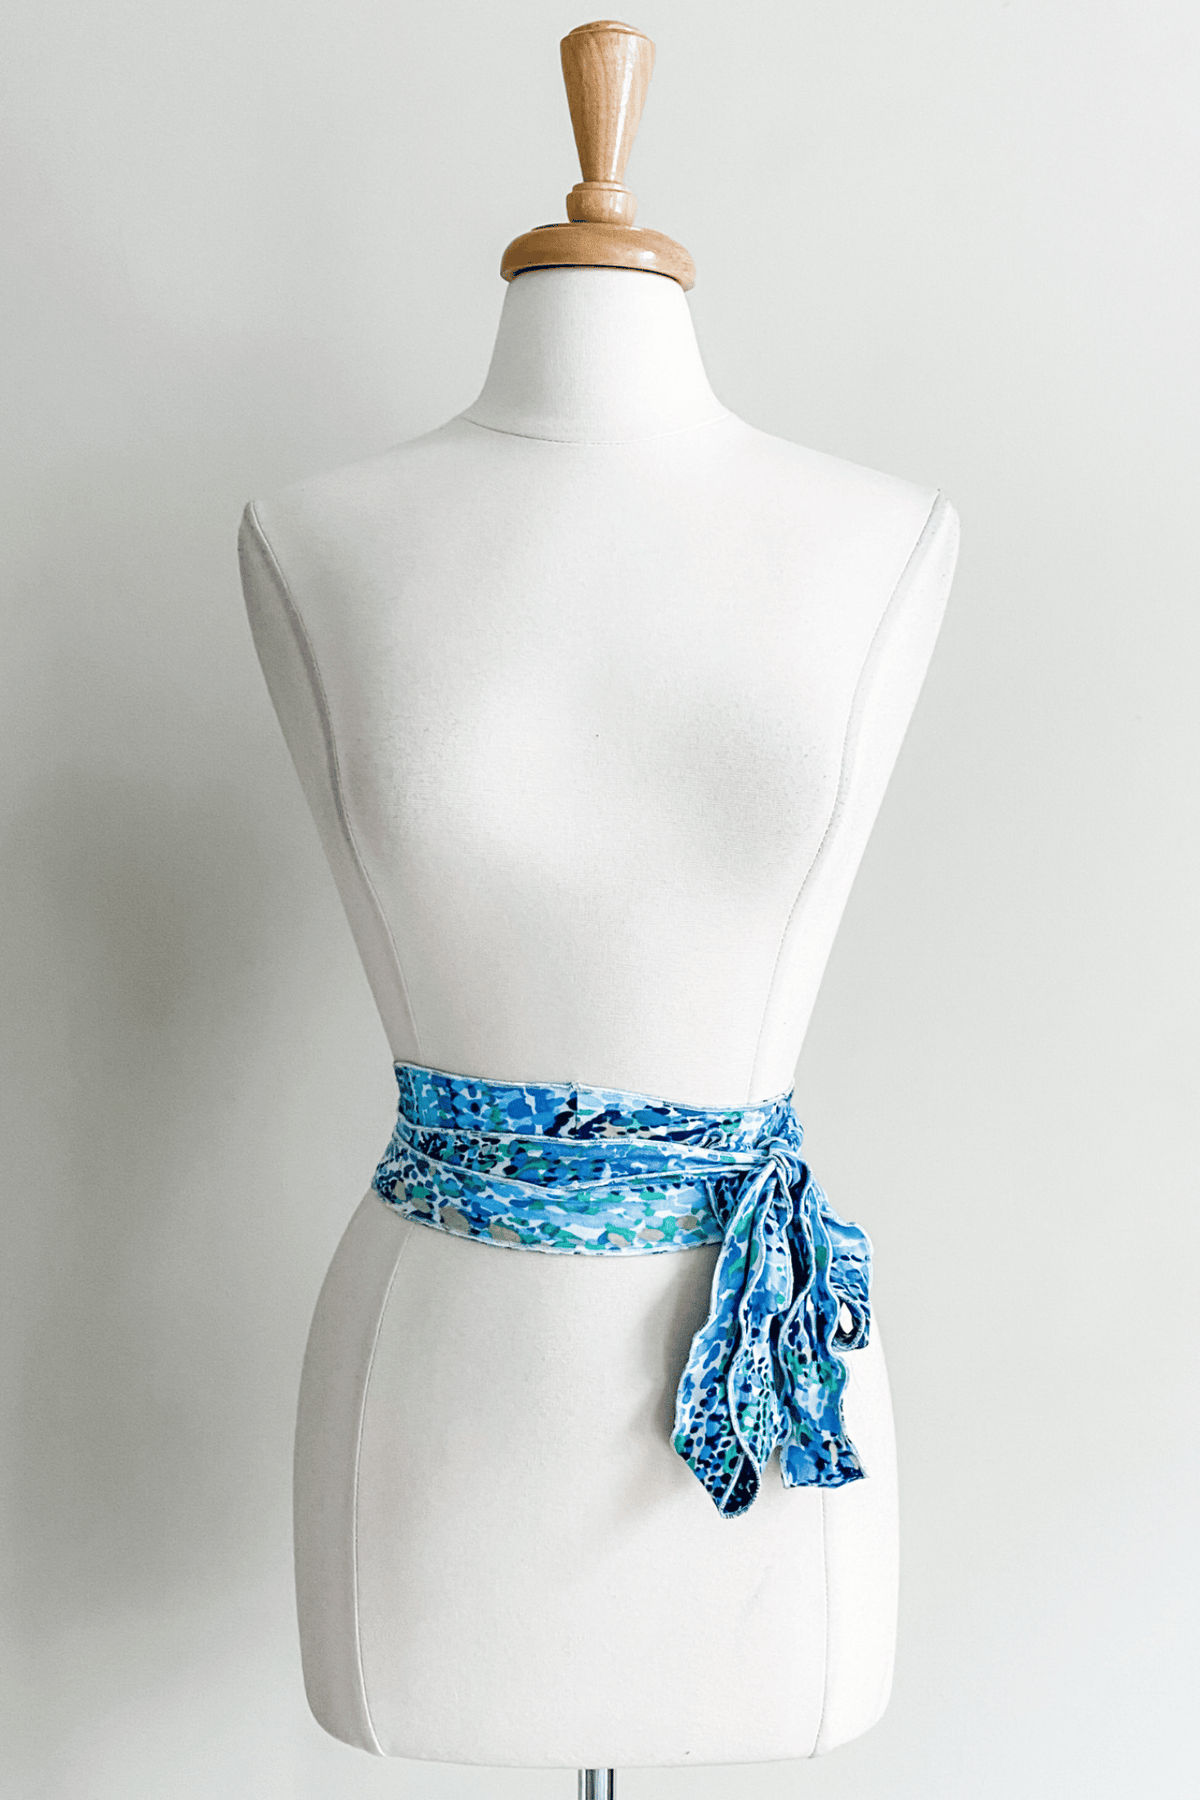 Diane Kroe Sash Prints (Whirlpool Turquoise Chartreuse) - Warm Weather Capsule Collection